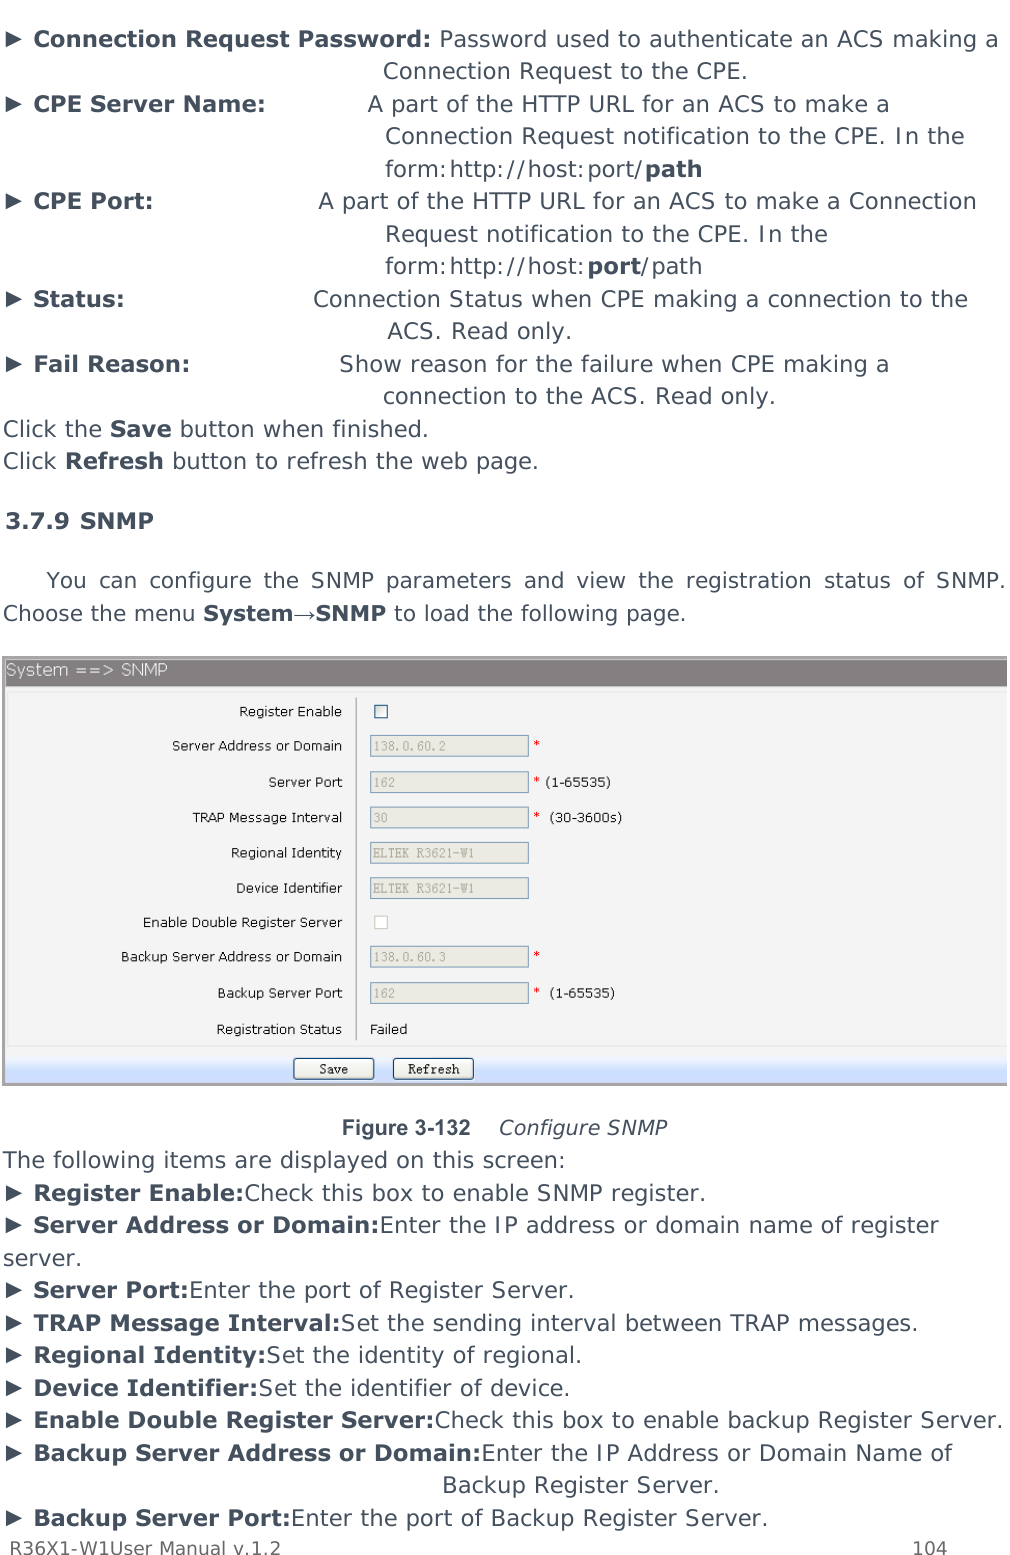           R36X1-W1User Manual v.1.2    104  ► Connection Request Password: Password used to authenticate an ACS making a Connection Request to the CPE. ► CPE Server Name:             A part of the HTTP URL for an ACS to make a Connection Request notification to the CPE. In the form:http://host:port/path ► CPE Port:                     A part of the HTTP URL for an ACS to make a Connection Request notification to the CPE. In the form:http://host:port/path ► Status:                        Connection Status when CPE making a connection to the ACS. Read only. ► Fail Reason:                   Show reason for the failure when CPE making a connection to the ACS. Read only. Click the Save button when finished. Click Refresh button to refresh the web page. 3.7.9 SNMP You can configure the SNMP parameters and view the registration status of SNMP. Choose the menu System→SNMP to load the following page.  Figure 3-132   Configure SNMP The following items are displayed on this screen: ► Register Enable:Check this box to enable SNMP register. ► Server Address or Domain:Enter the IP address or domain name of register server. ► Server Port:Enter the port of Register Server. ► TRAP Message Interval:Set the sending interval between TRAP messages. ► Regional Identity:Set the identity of regional. ► Device Identifier:Set the identifier of device. ► Enable Double Register Server:Check this box to enable backup Register Server. ► Backup Server Address or Domain:Enter the IP Address or Domain Name of Backup Register Server. ► Backup Server Port:Enter the port of Backup Register Server. 